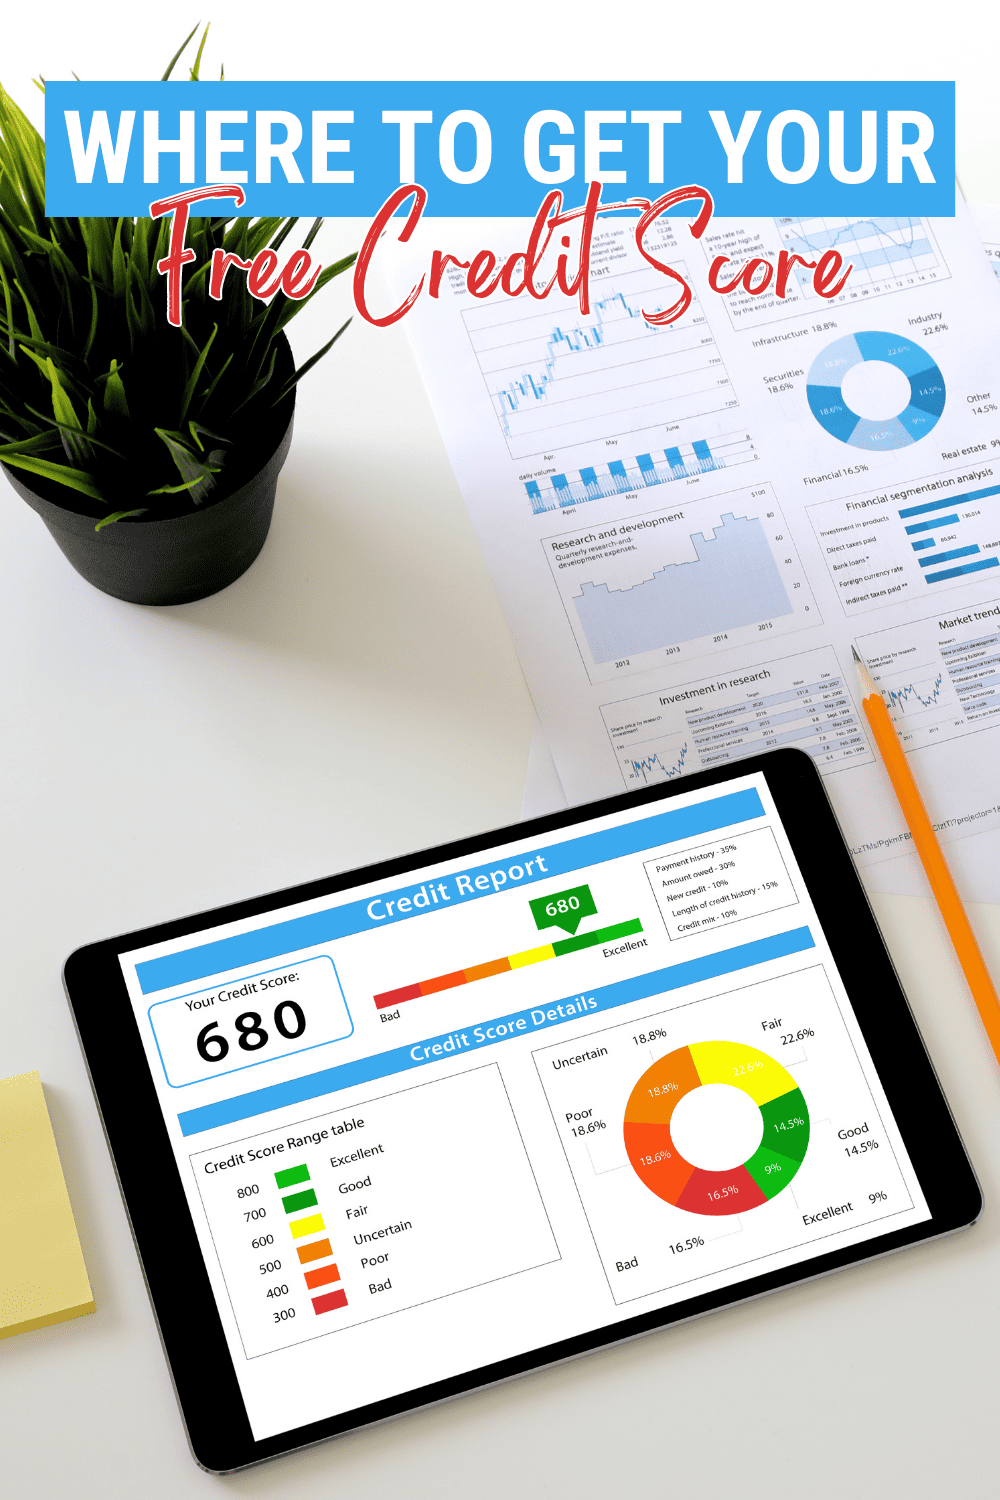 Learn how to get your free credit score and report plus find out which are the best sites for it. Discover what you need to look out for when finding a place that offers free credit reports. via @mystayathome